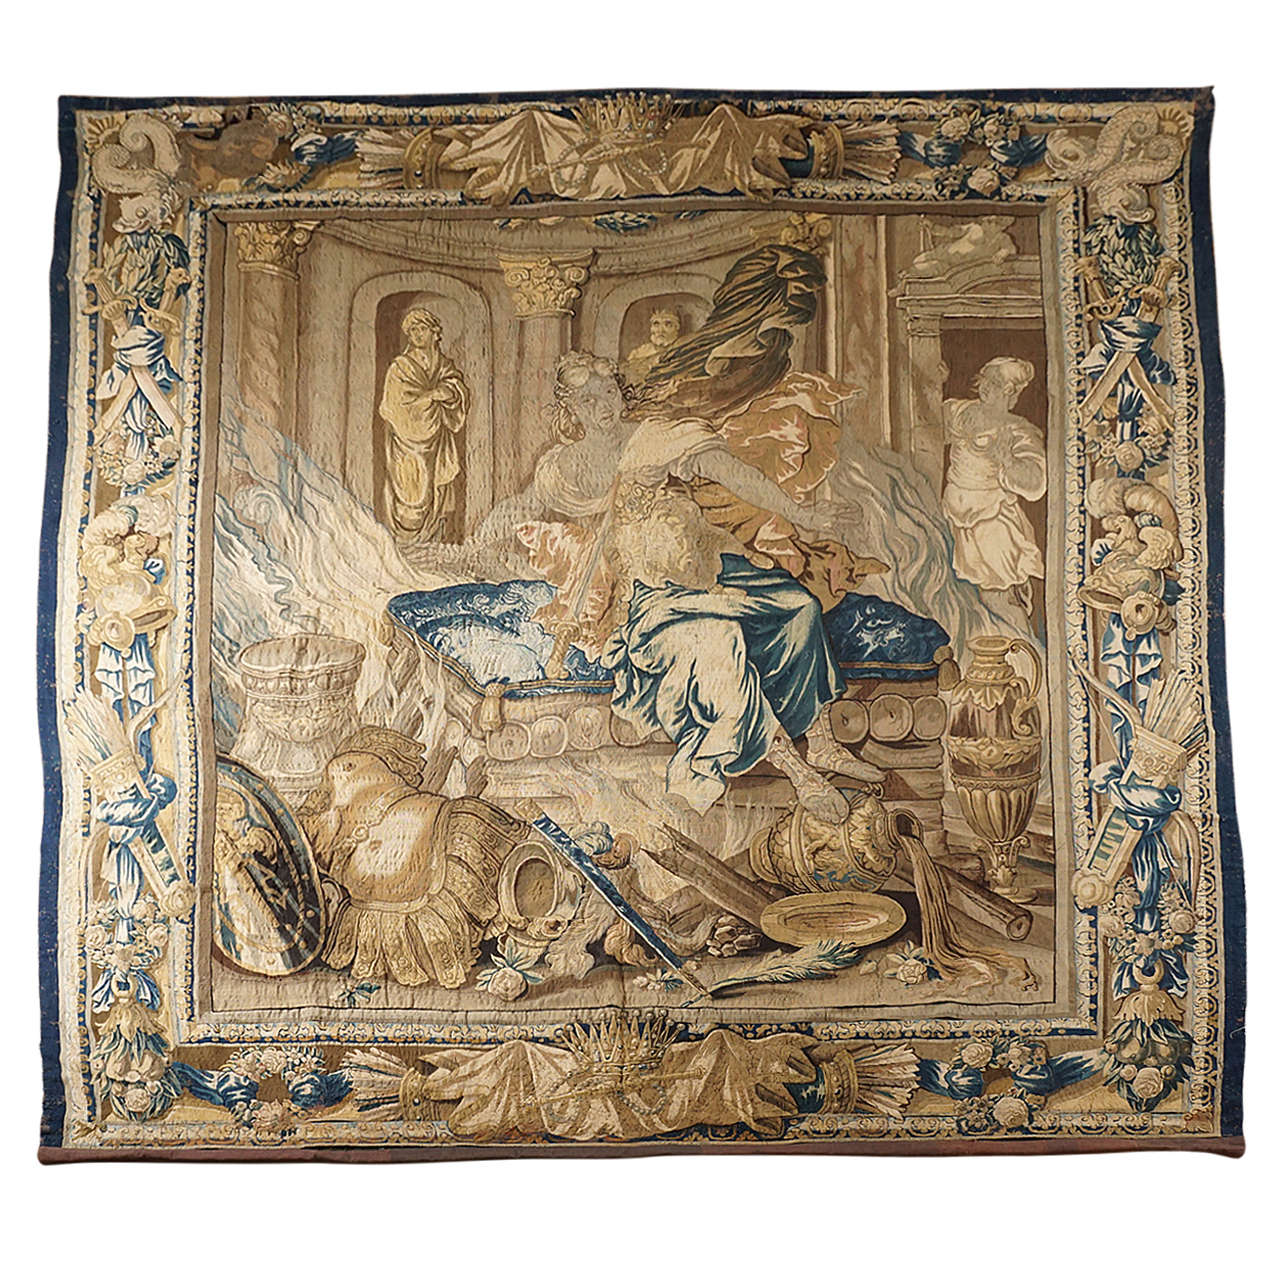 Aubusson Mythological Tapestry, Second Half of the 17th Century